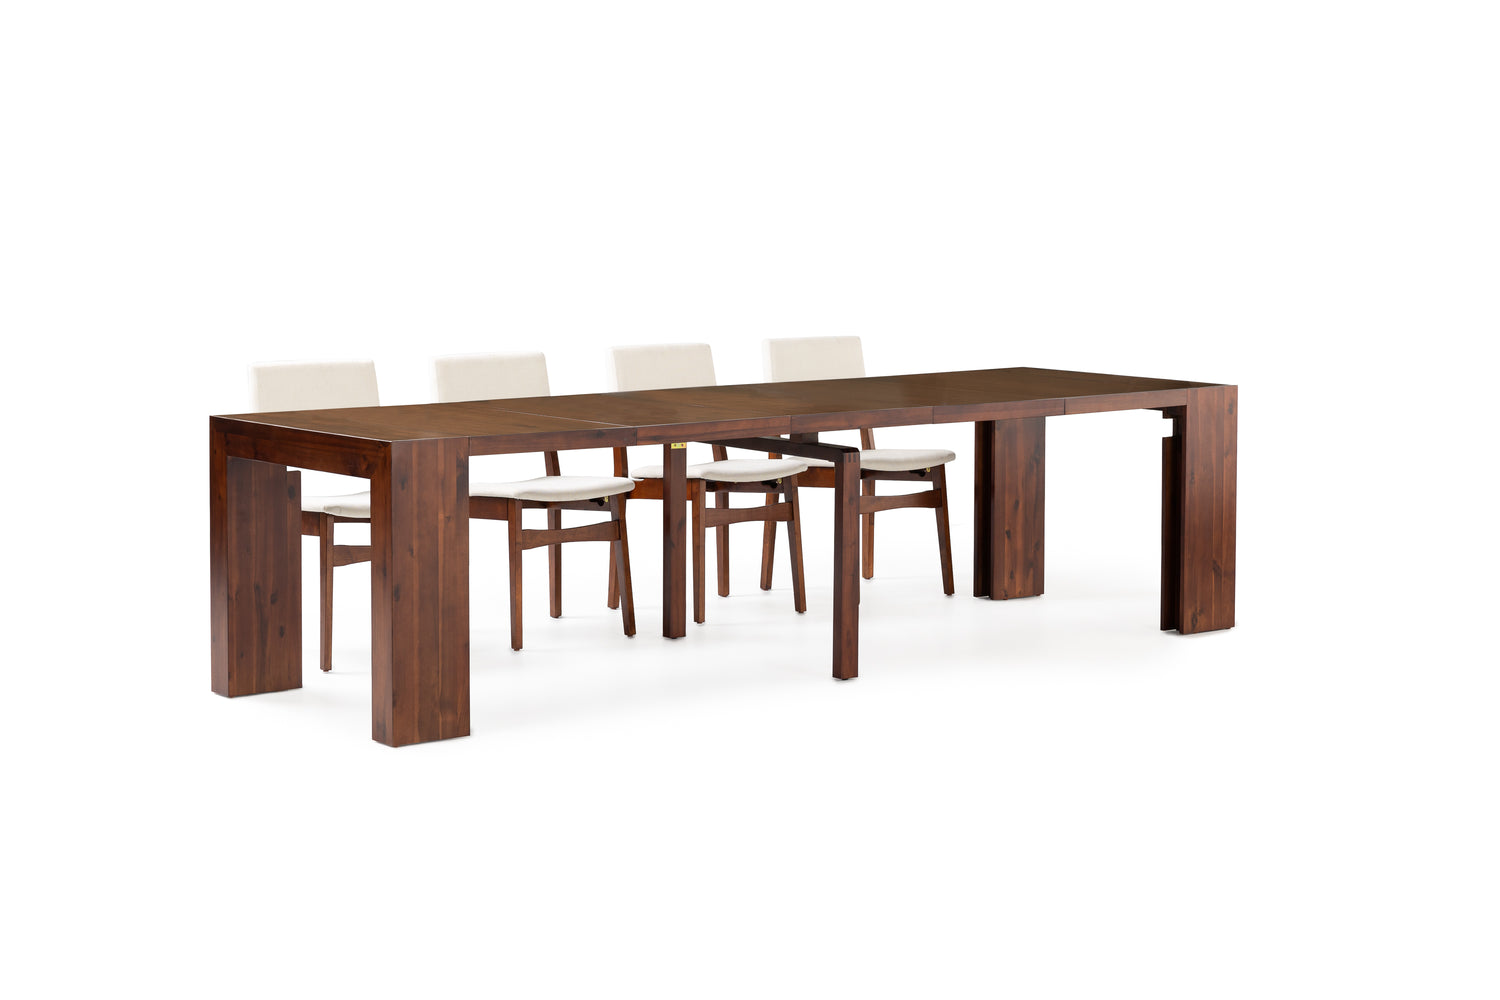 American Mahogany::Gallery::American Mahogany Transformer Table Shown with Removable Panels